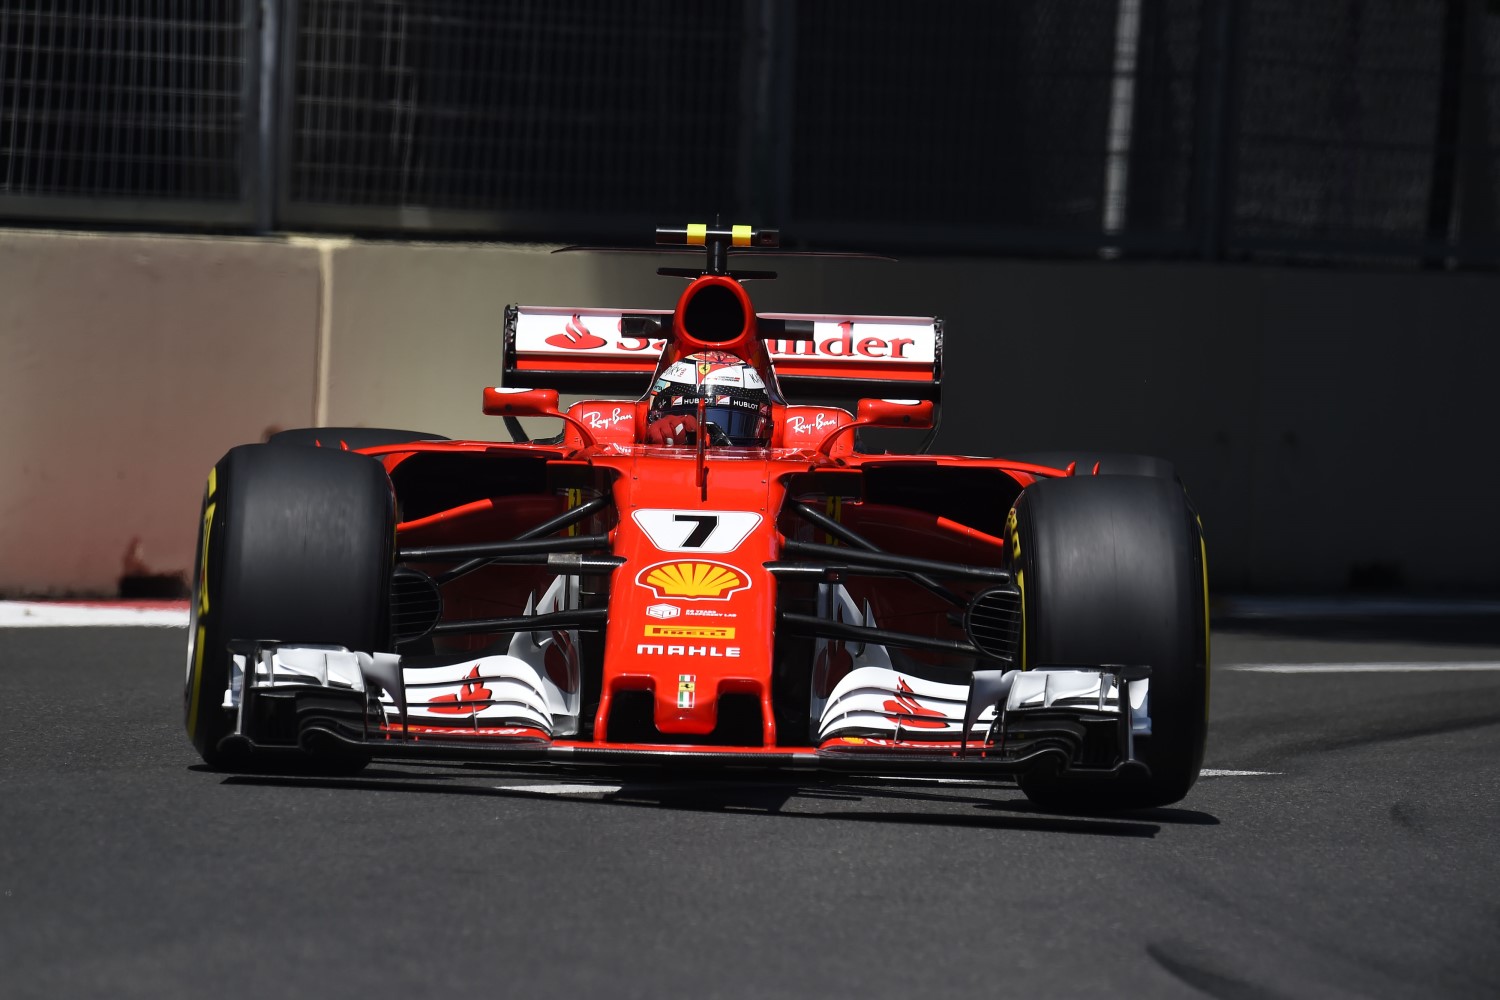 Is Ferrari mixing oil into their fuel?